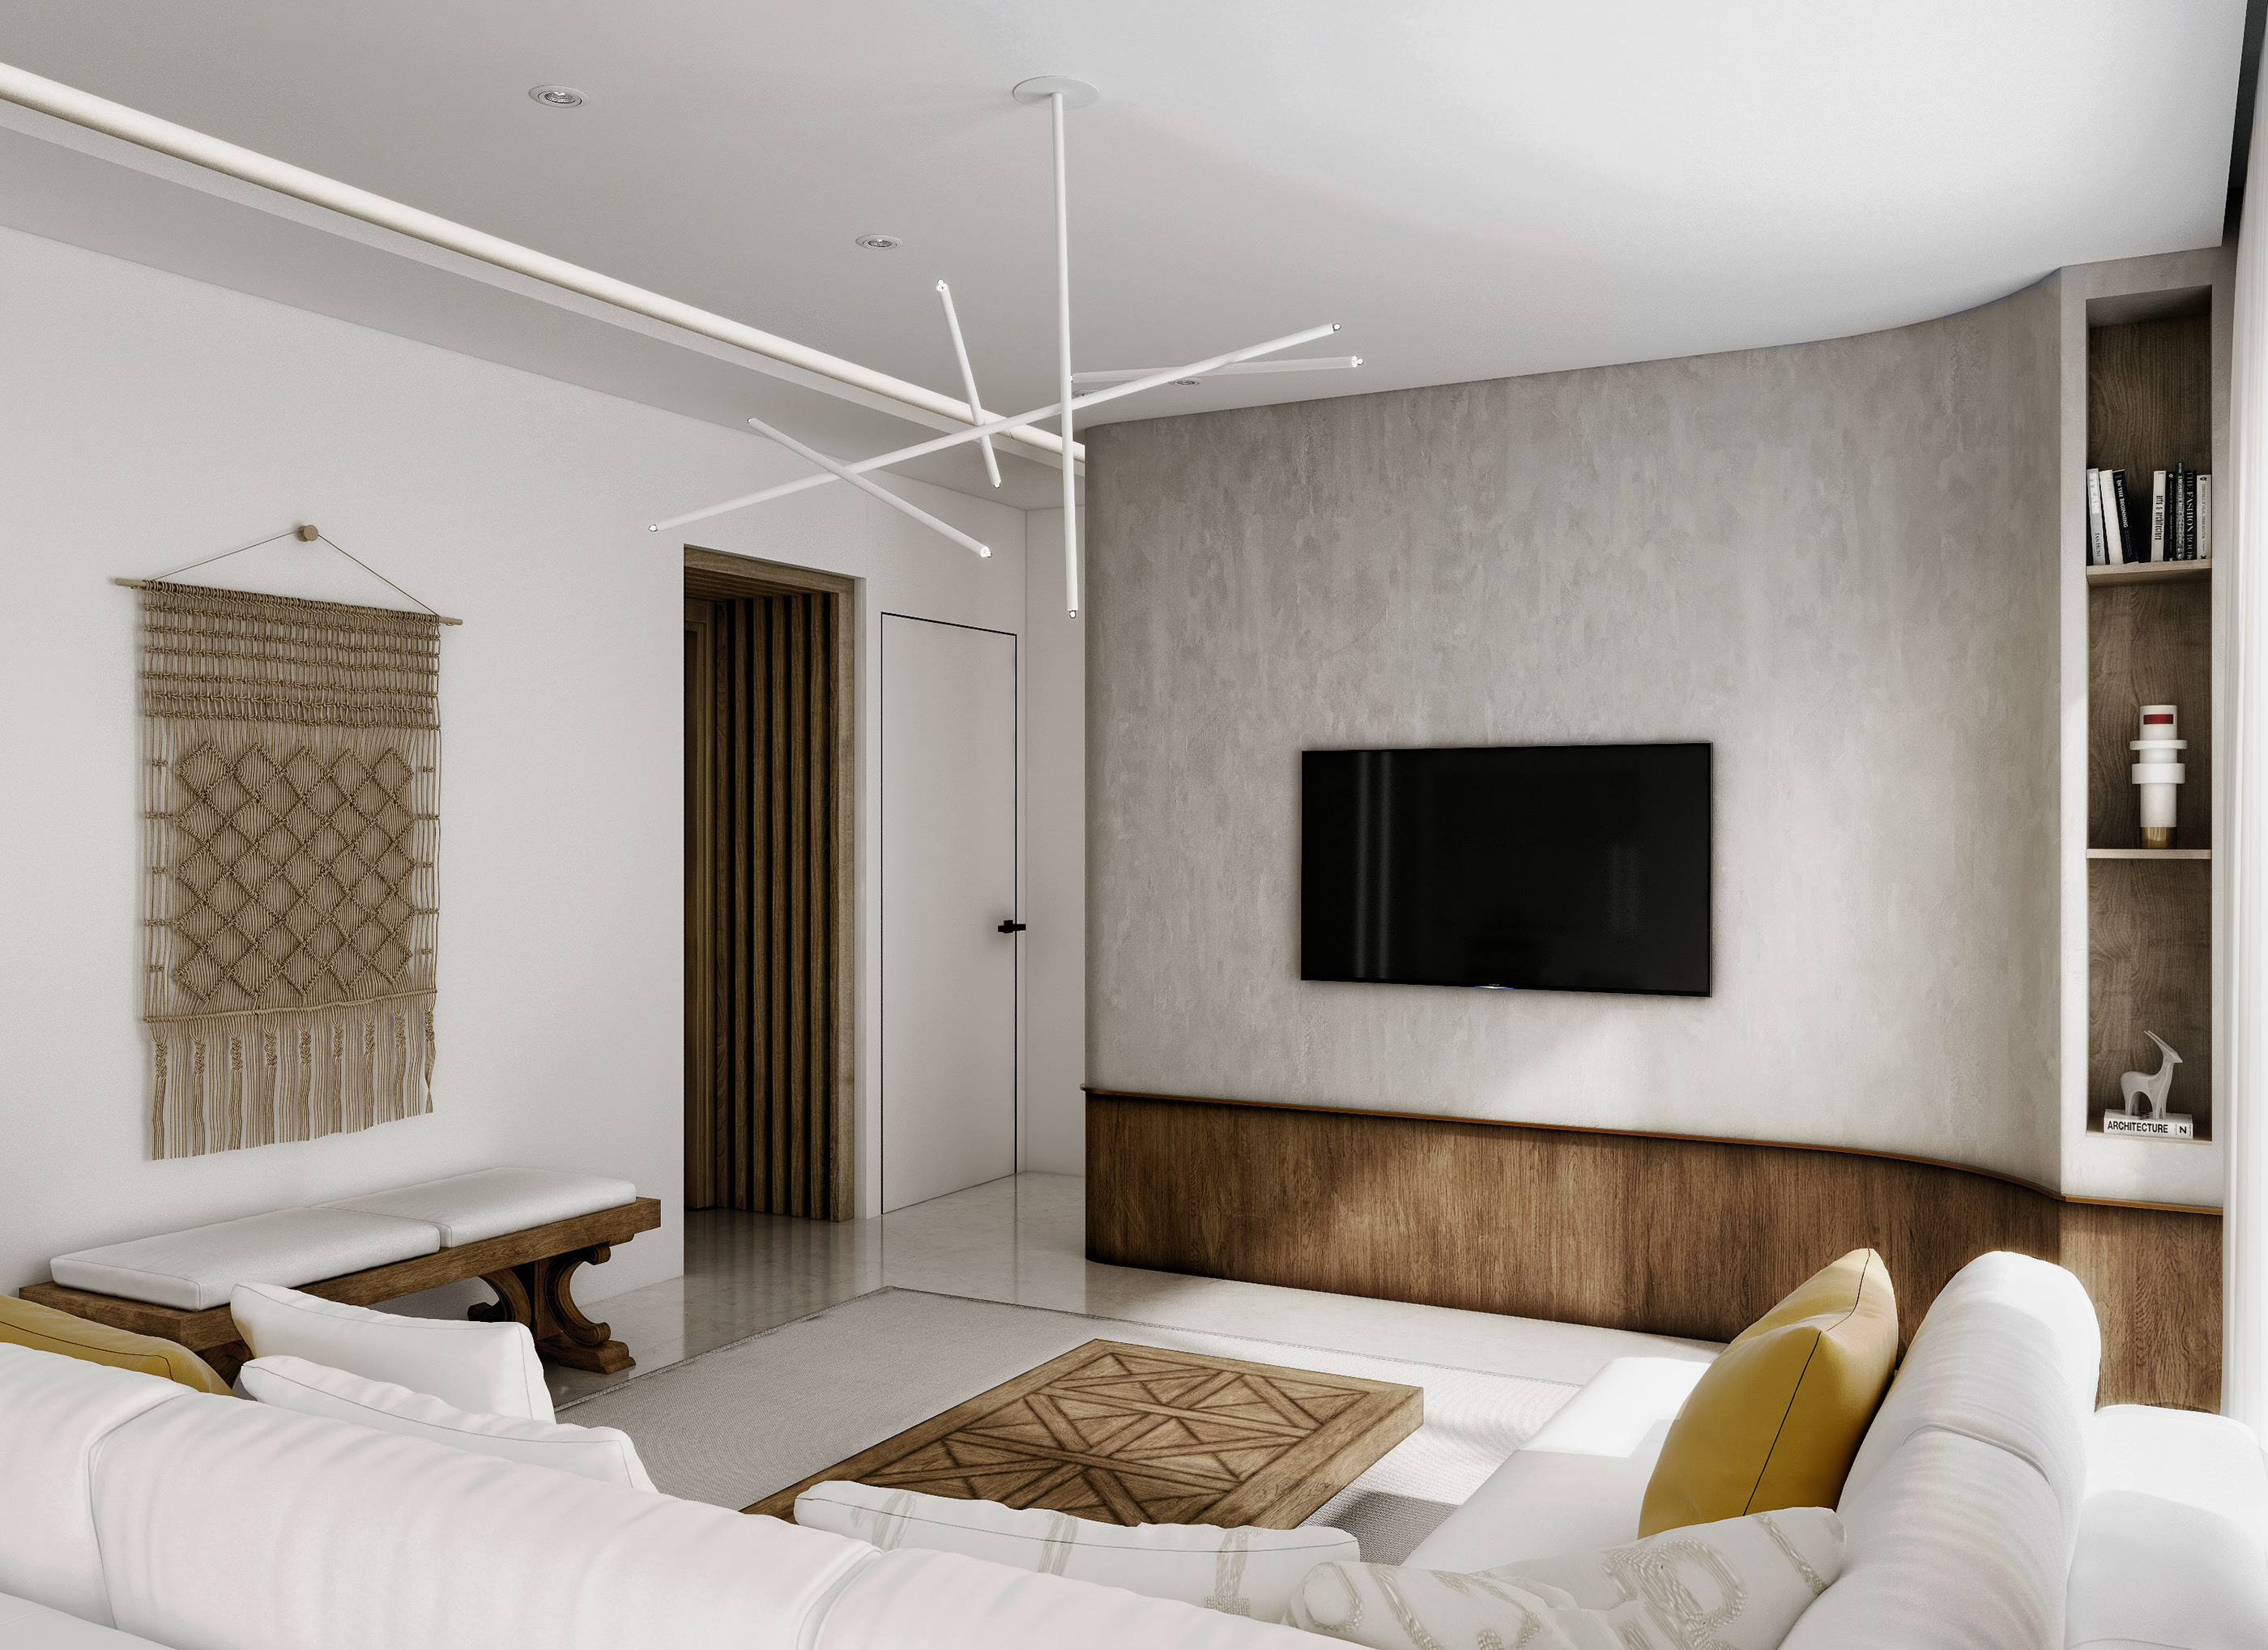 Apartment in Rhodes, Greece in 3d max vray 3.0 image